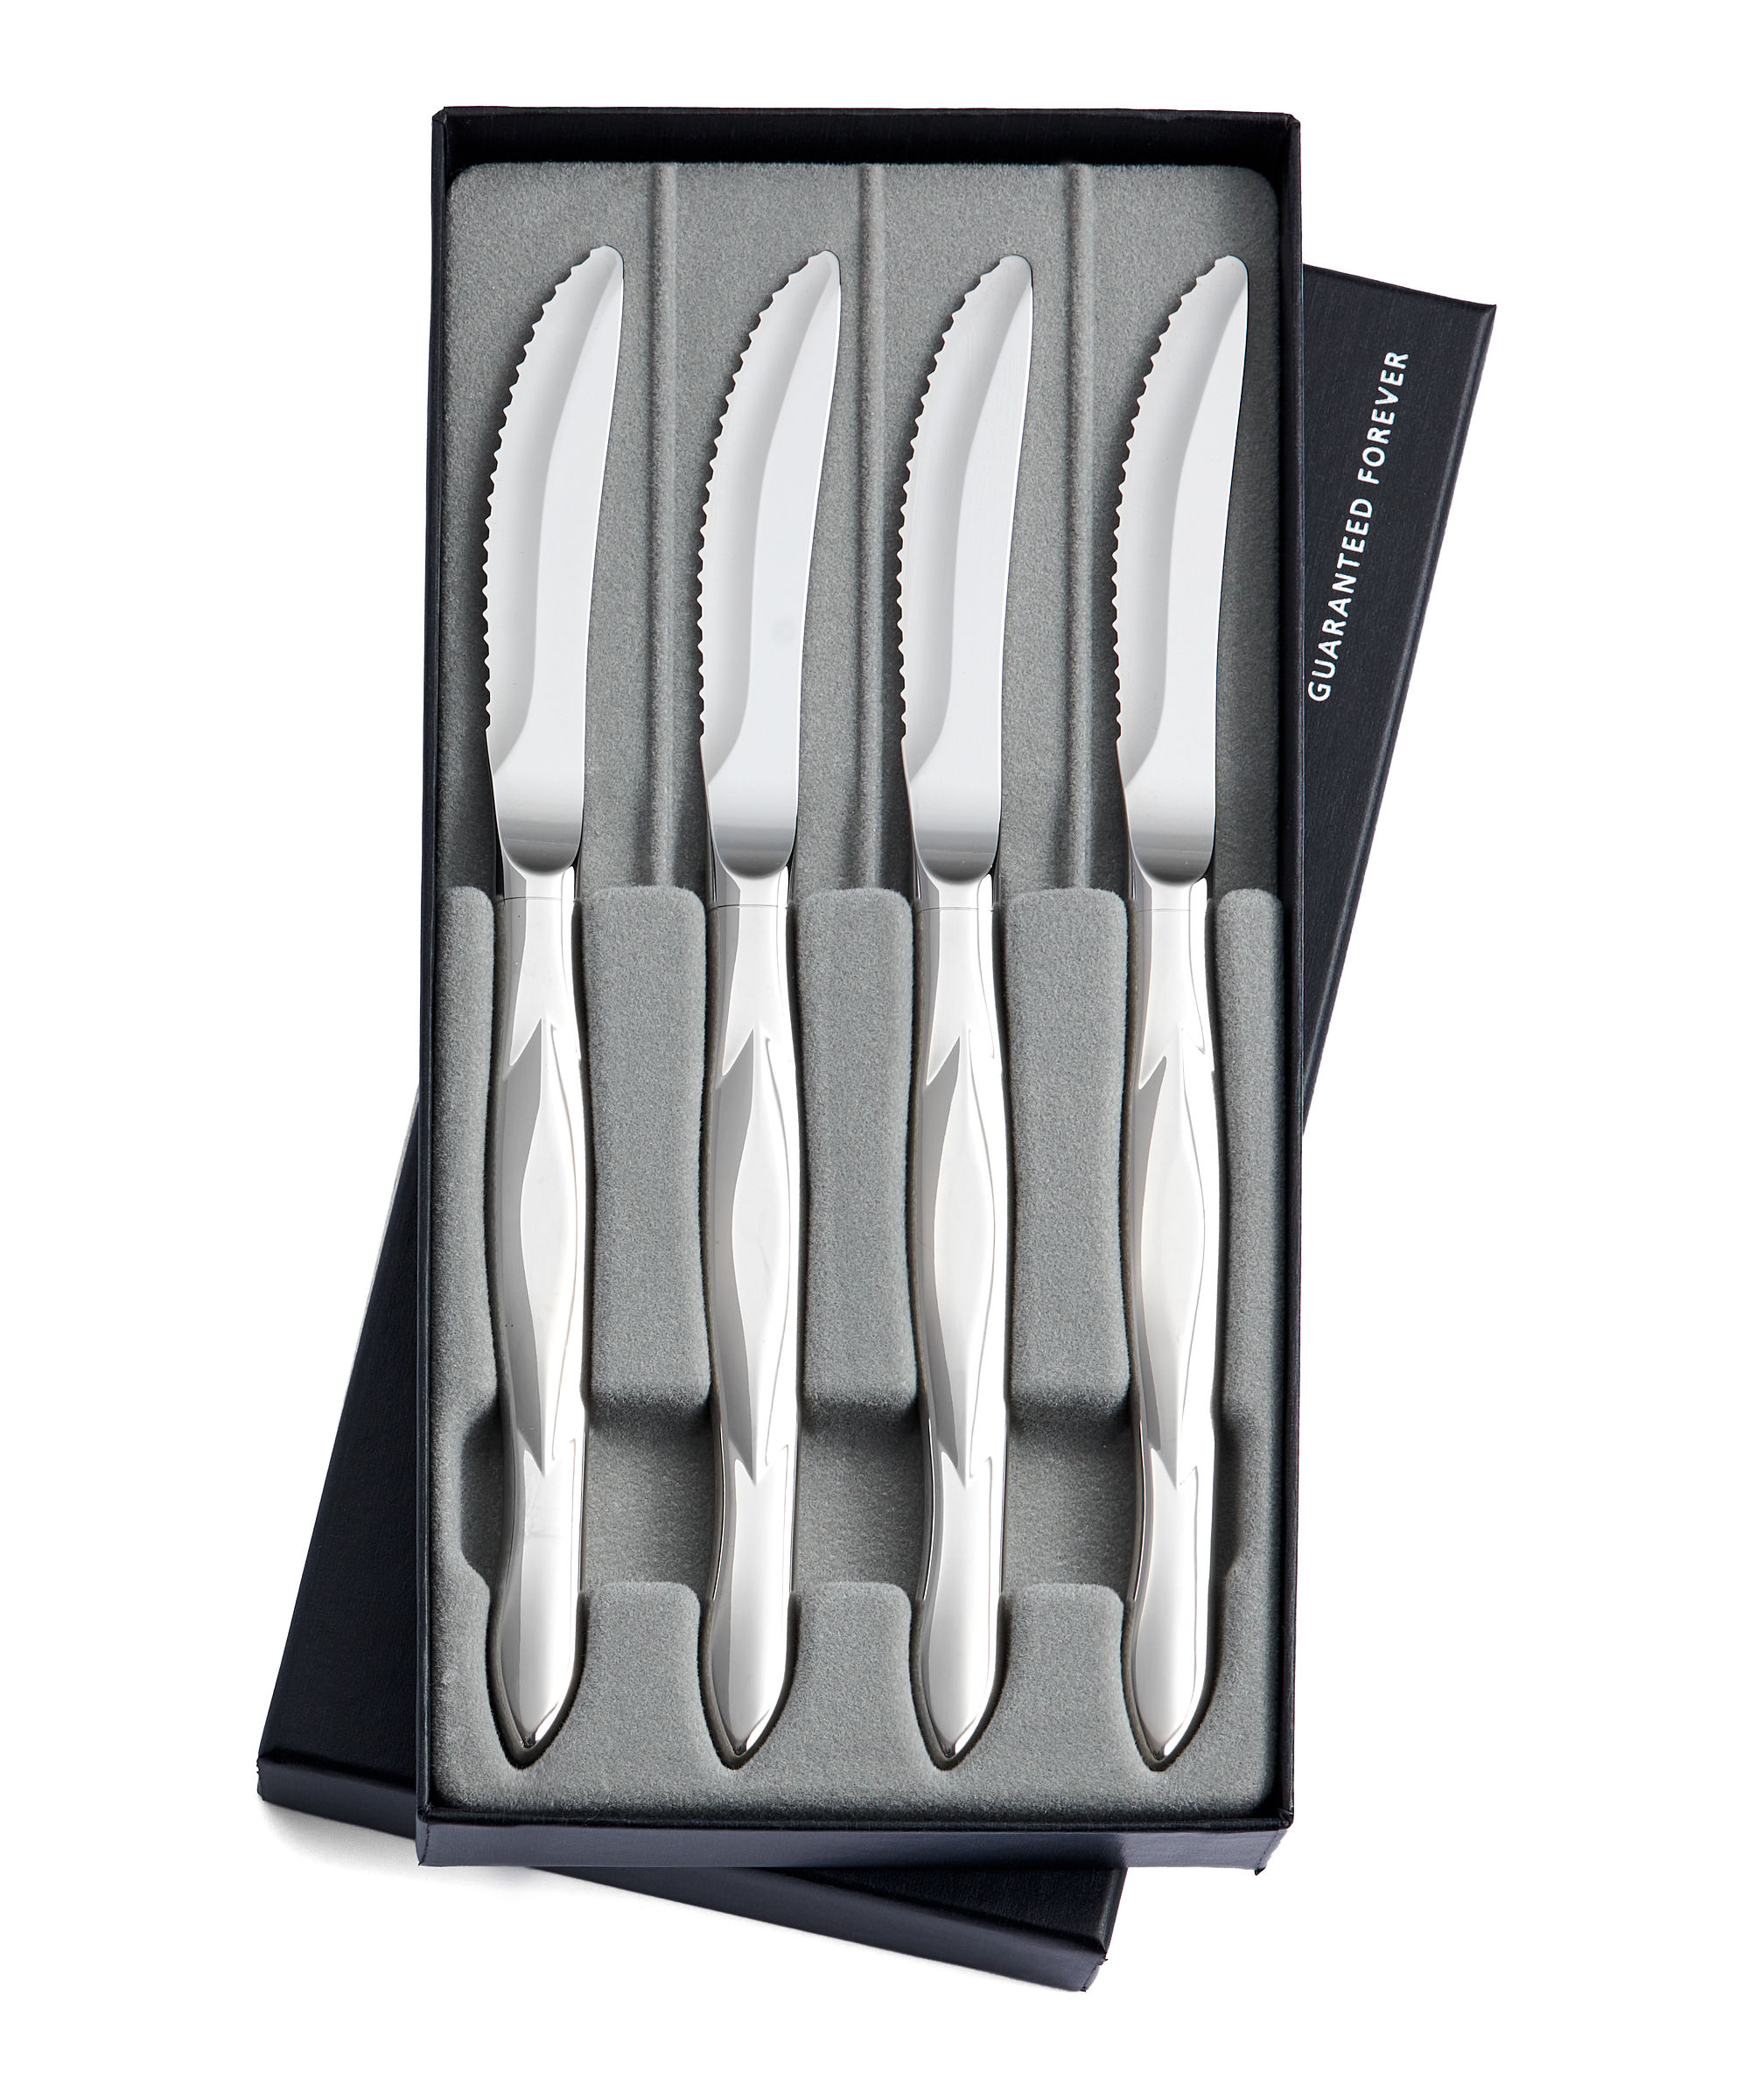 Cutco Table Knives Set of Four with Tray, Four of Cutcos Best-Selling